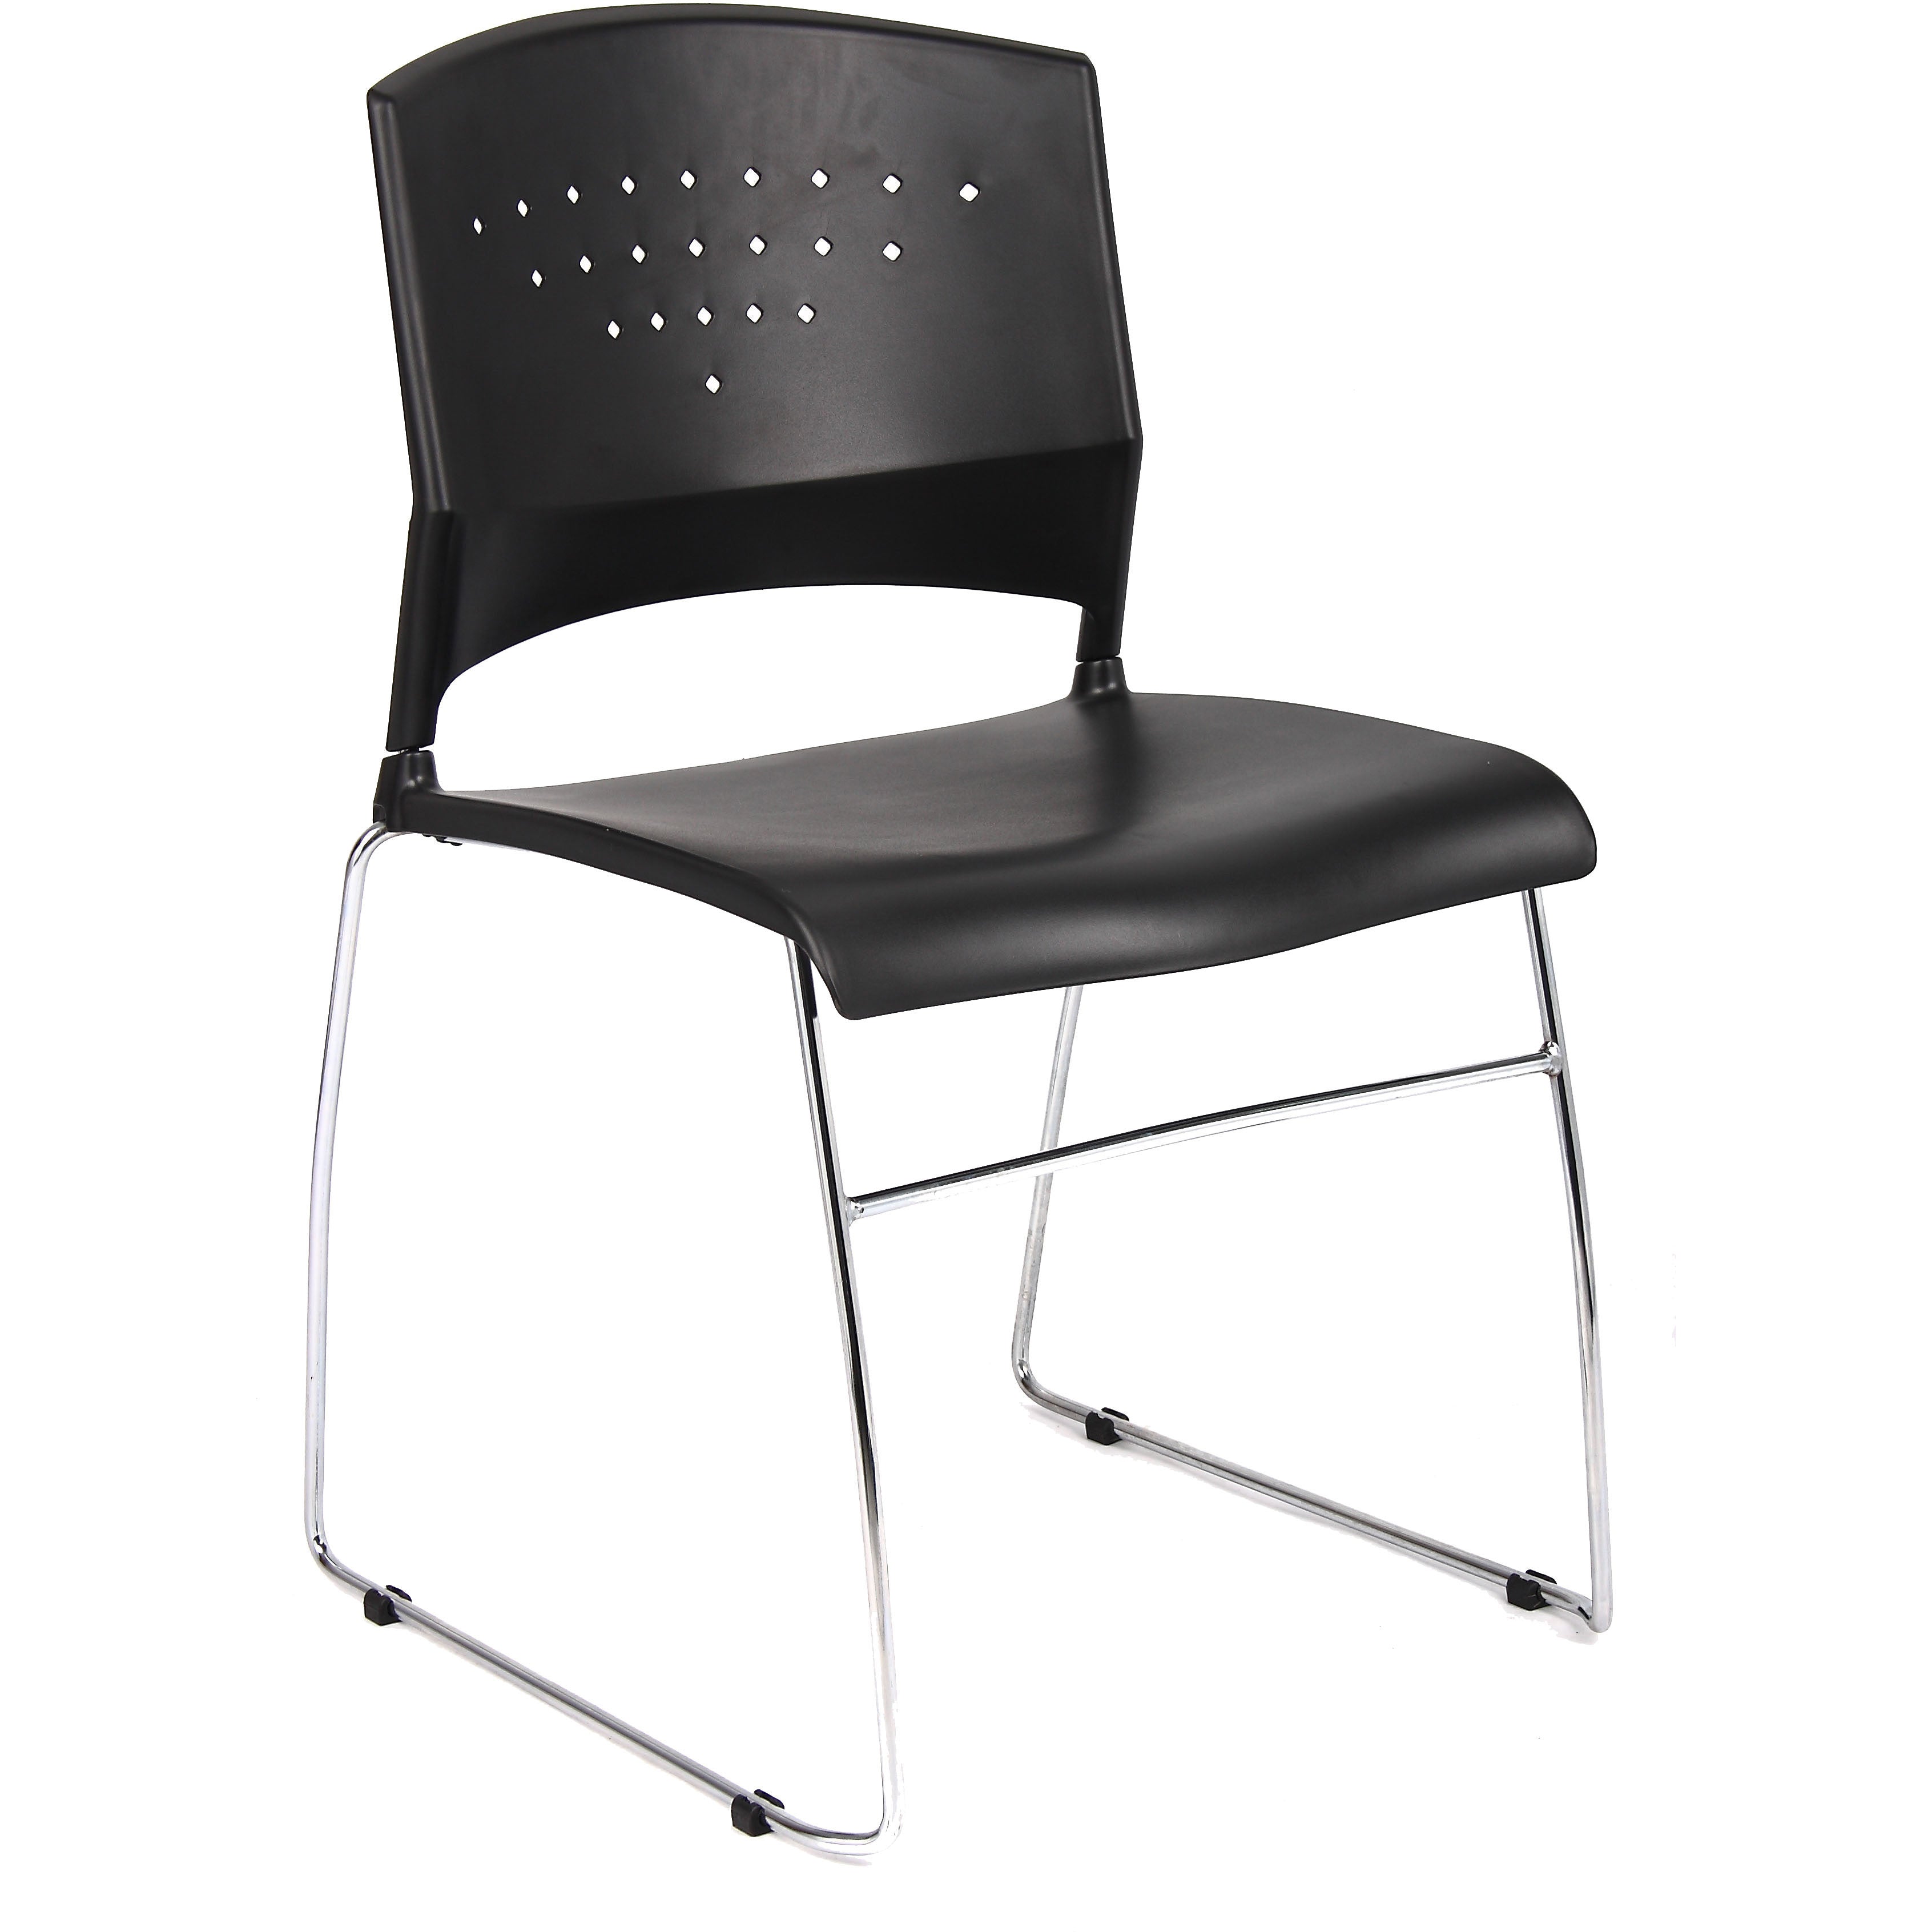 Black Stack Chair With Chrome Frame (Pack of 4), B1400-BK-4